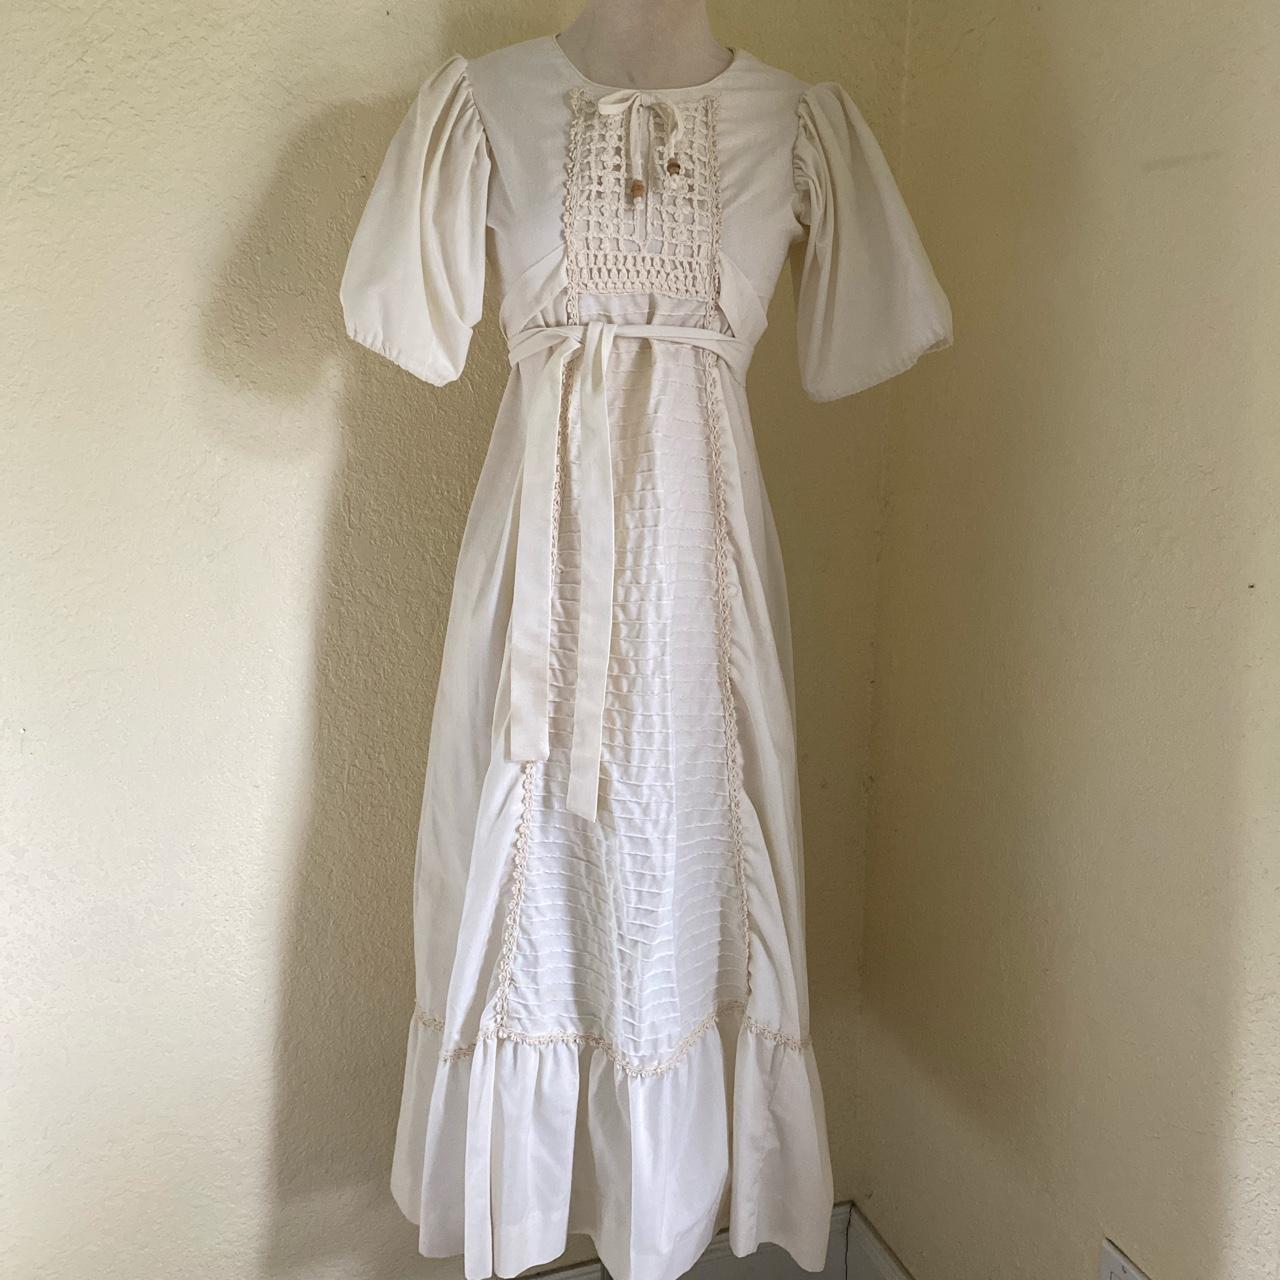 OPEN TO OFFERS ! Vintage 100% white cream cotton... - Depop